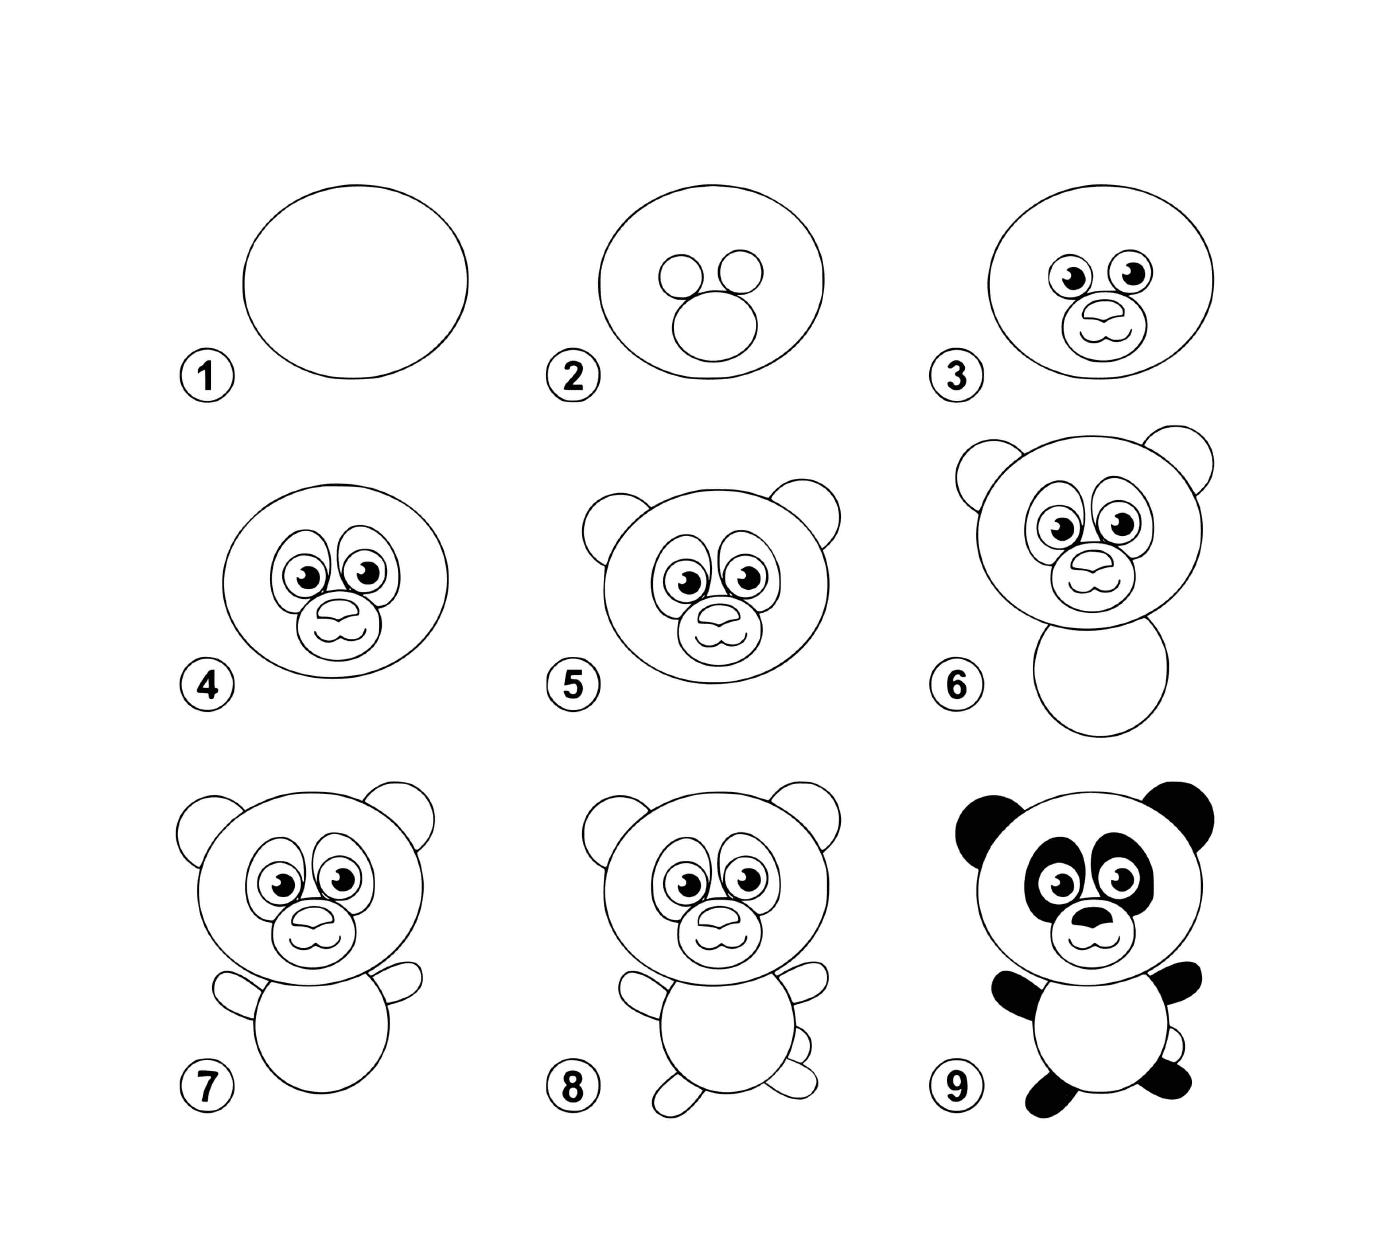  How to draw a panda step by step 